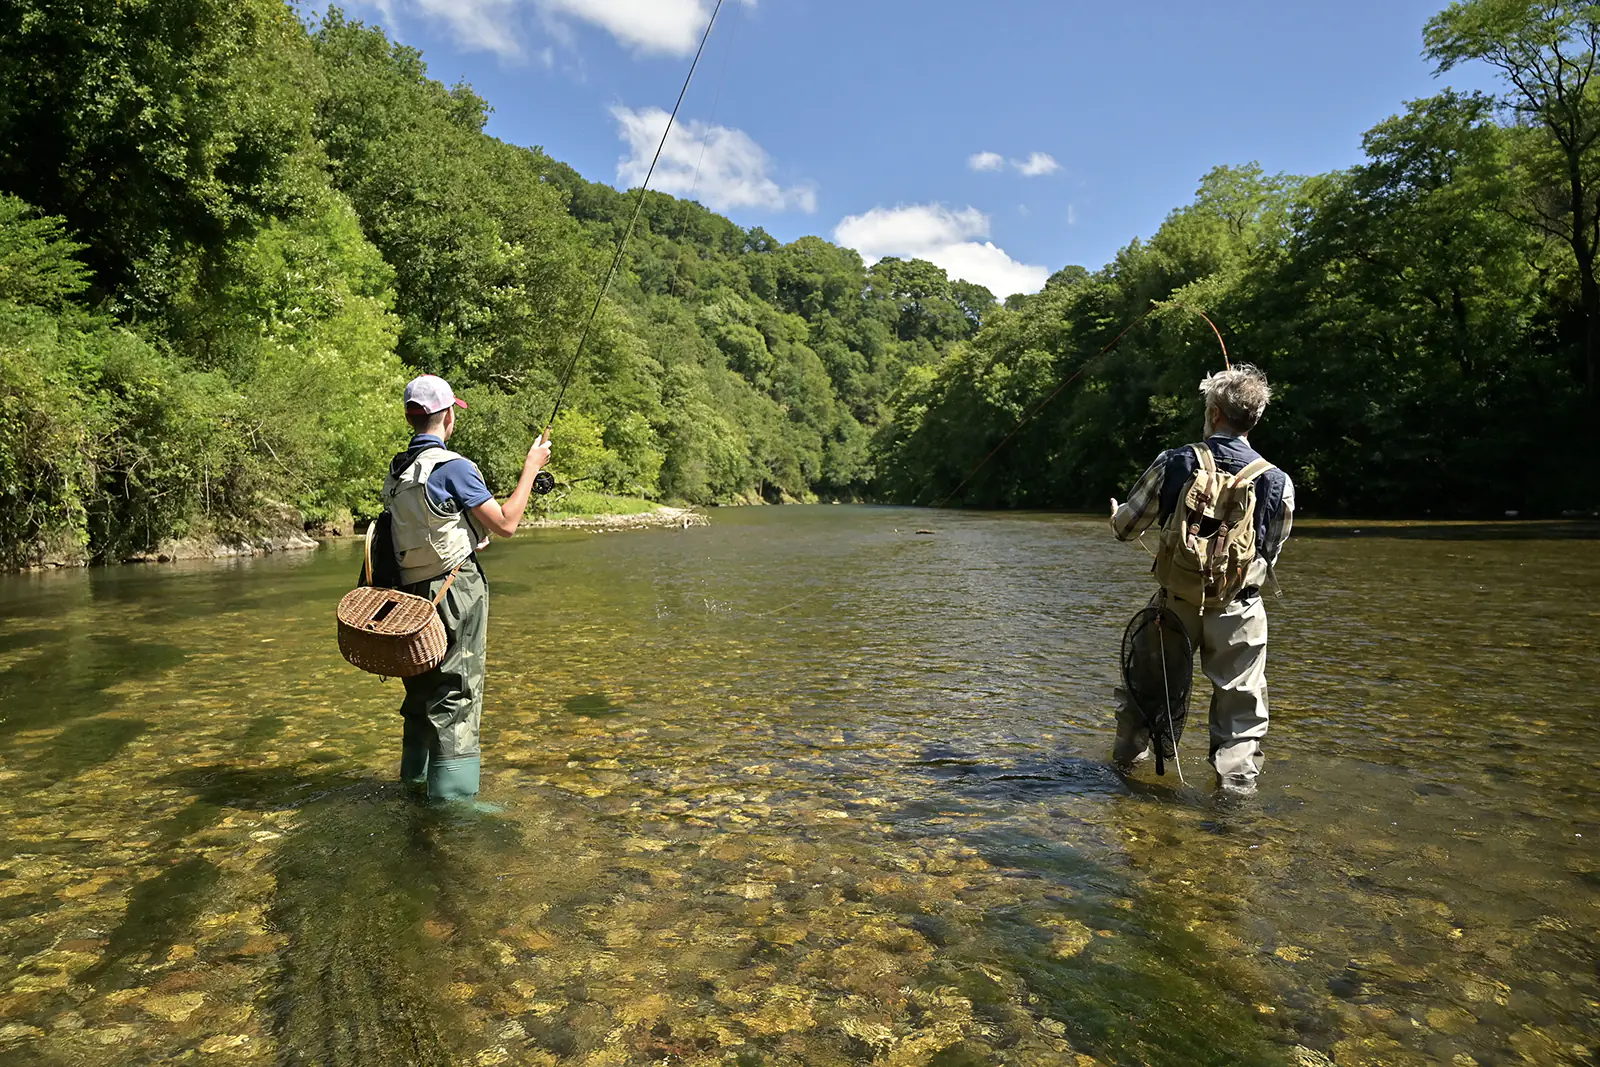 Two people stand in the Little Tennessee River with their backs turned casting fly fishing lines into the water.